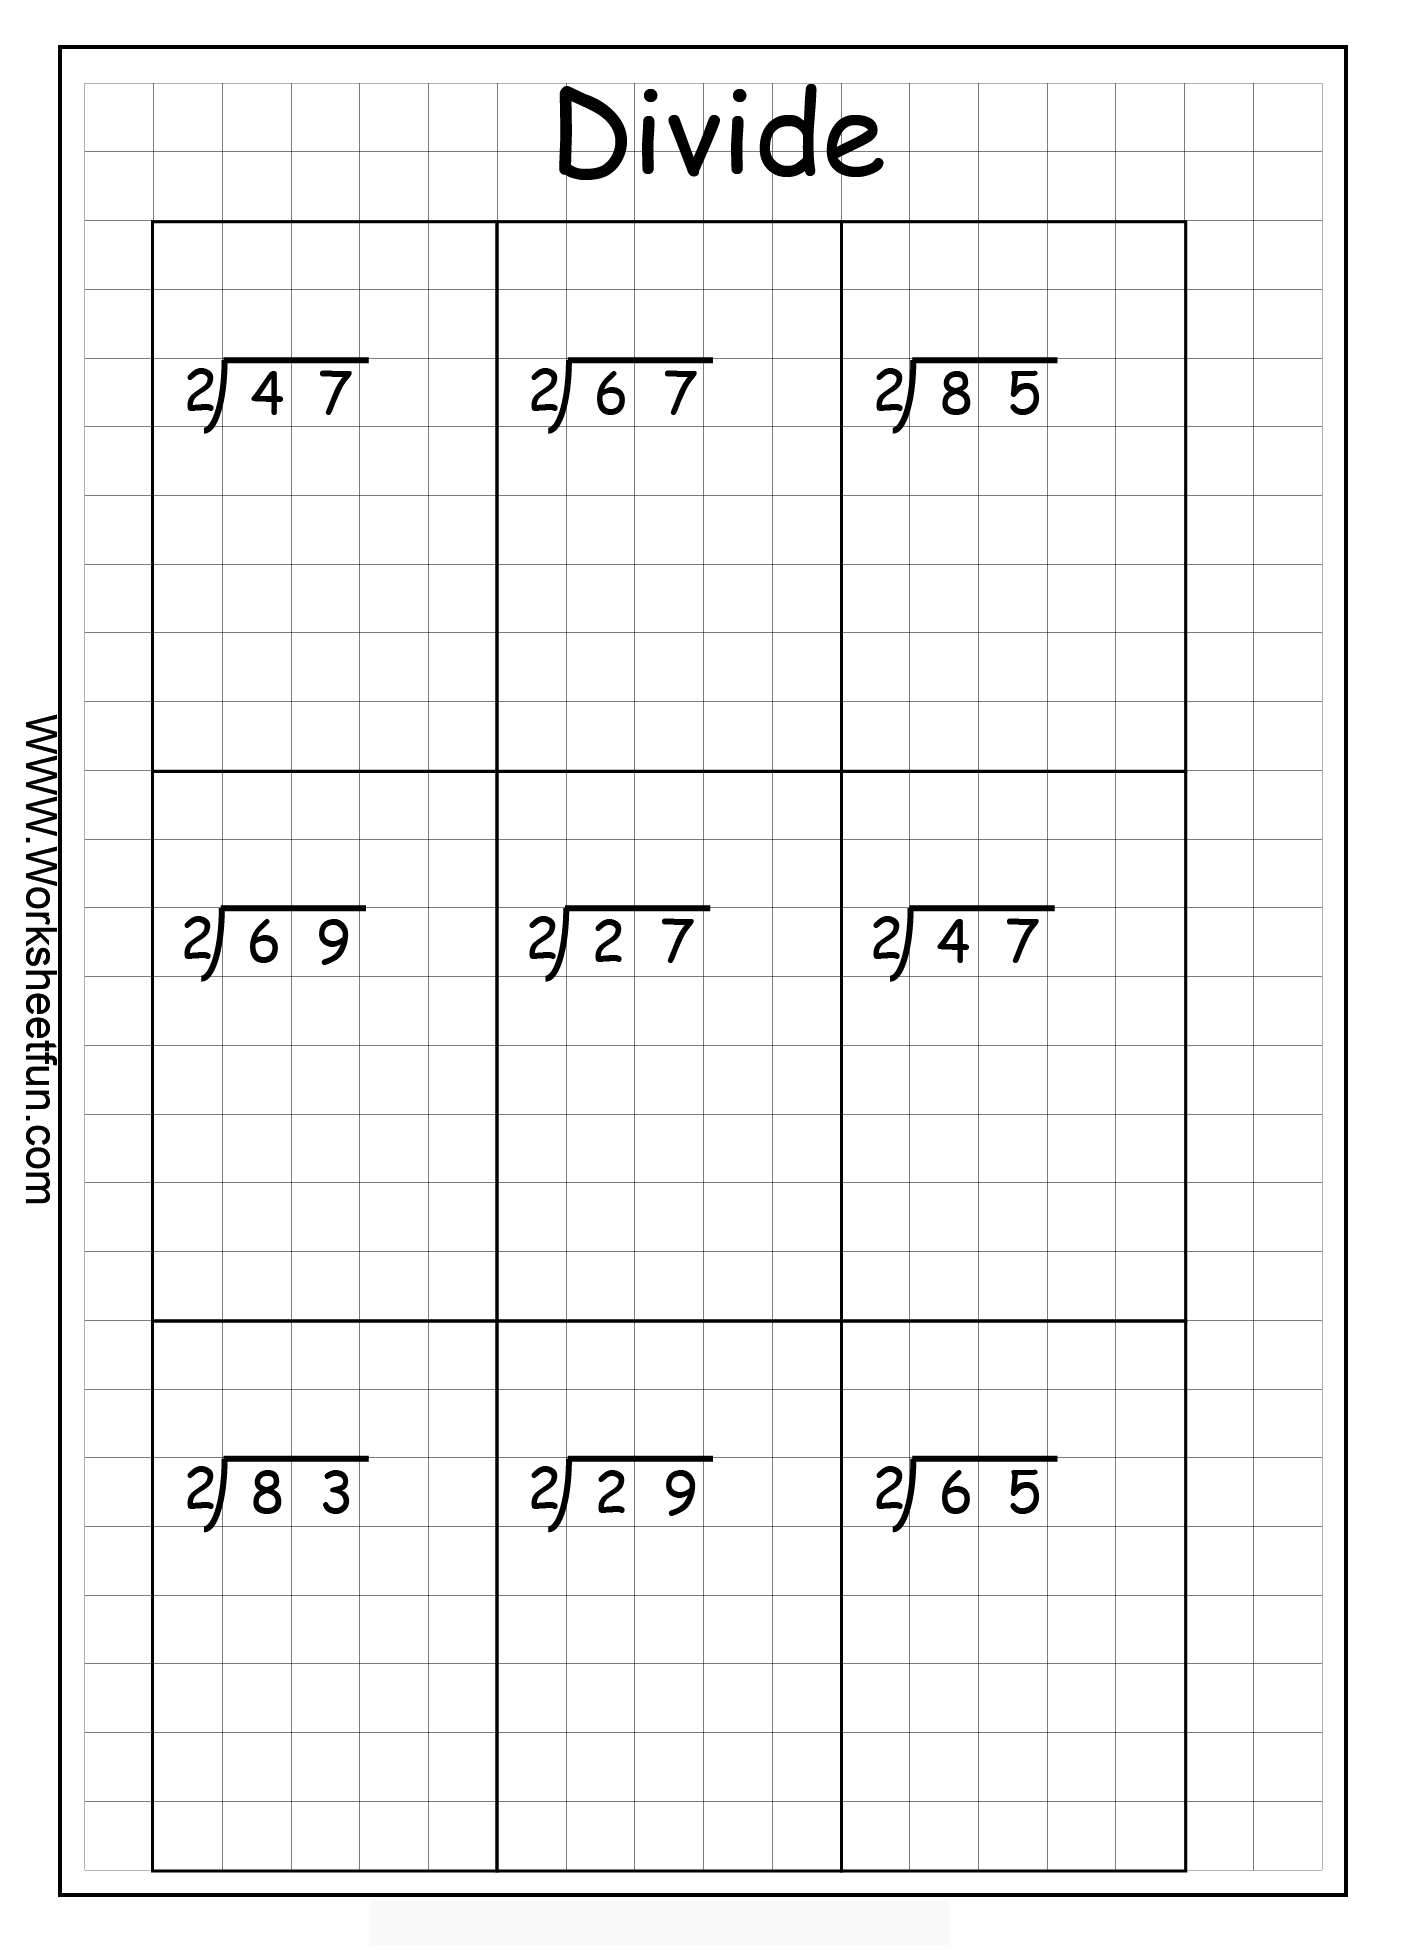 Long Division 2 Digits By 1 Digit With Remainders 8 Worksheets FREE Printable Worksheets 